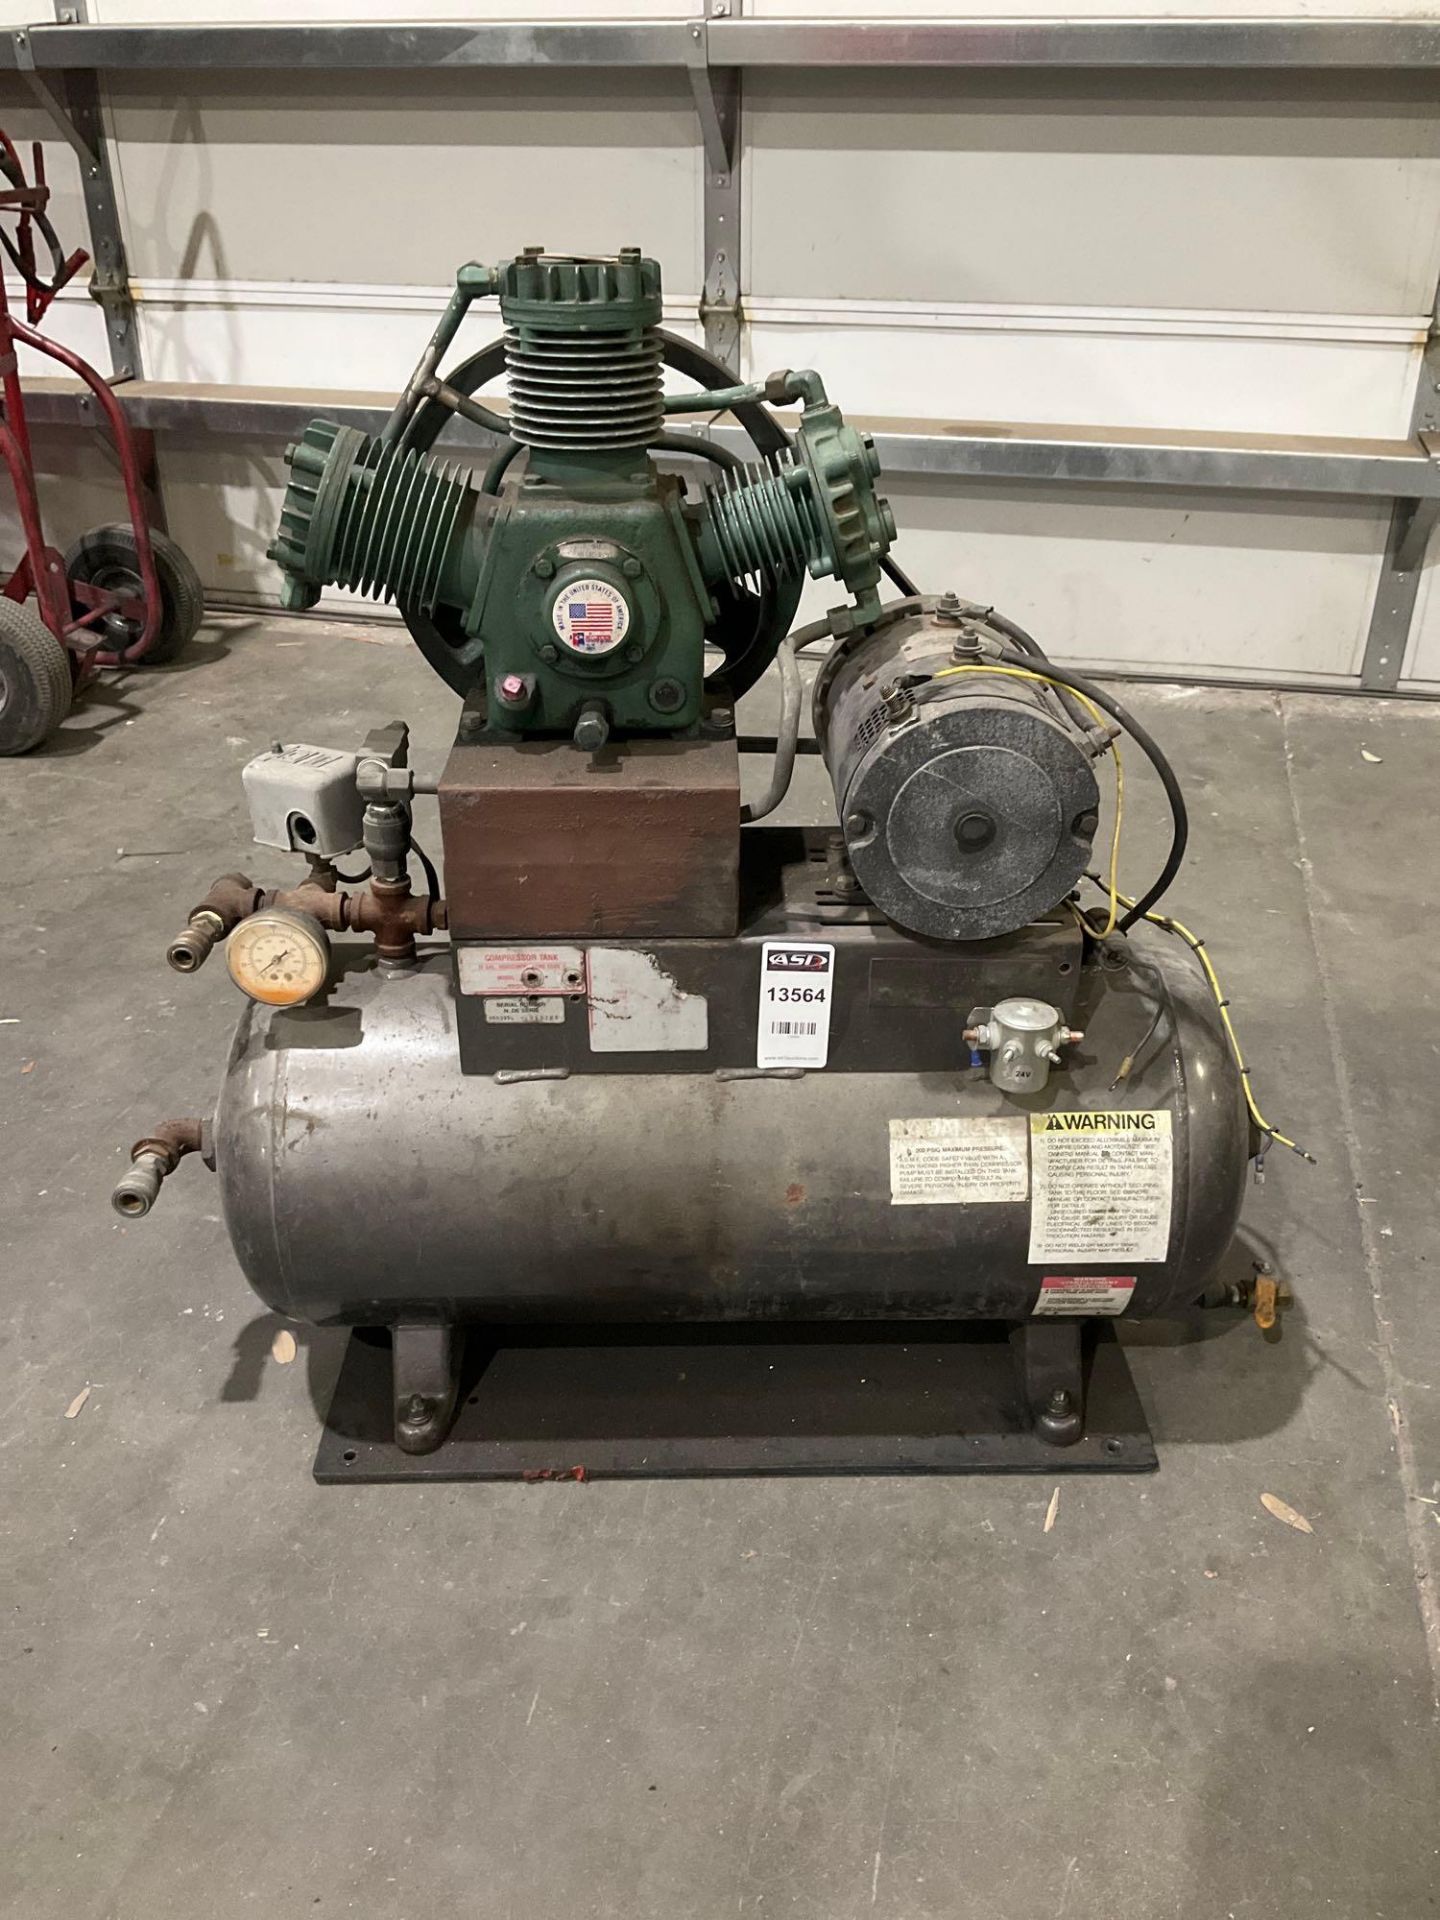 AIR COMPRESSOR, ELECTRIC , APPROX 24 VOLTS, APPROX 15 GAL HORIZONTAL COMPRESSOR TANK, WORKS - Image 2 of 7